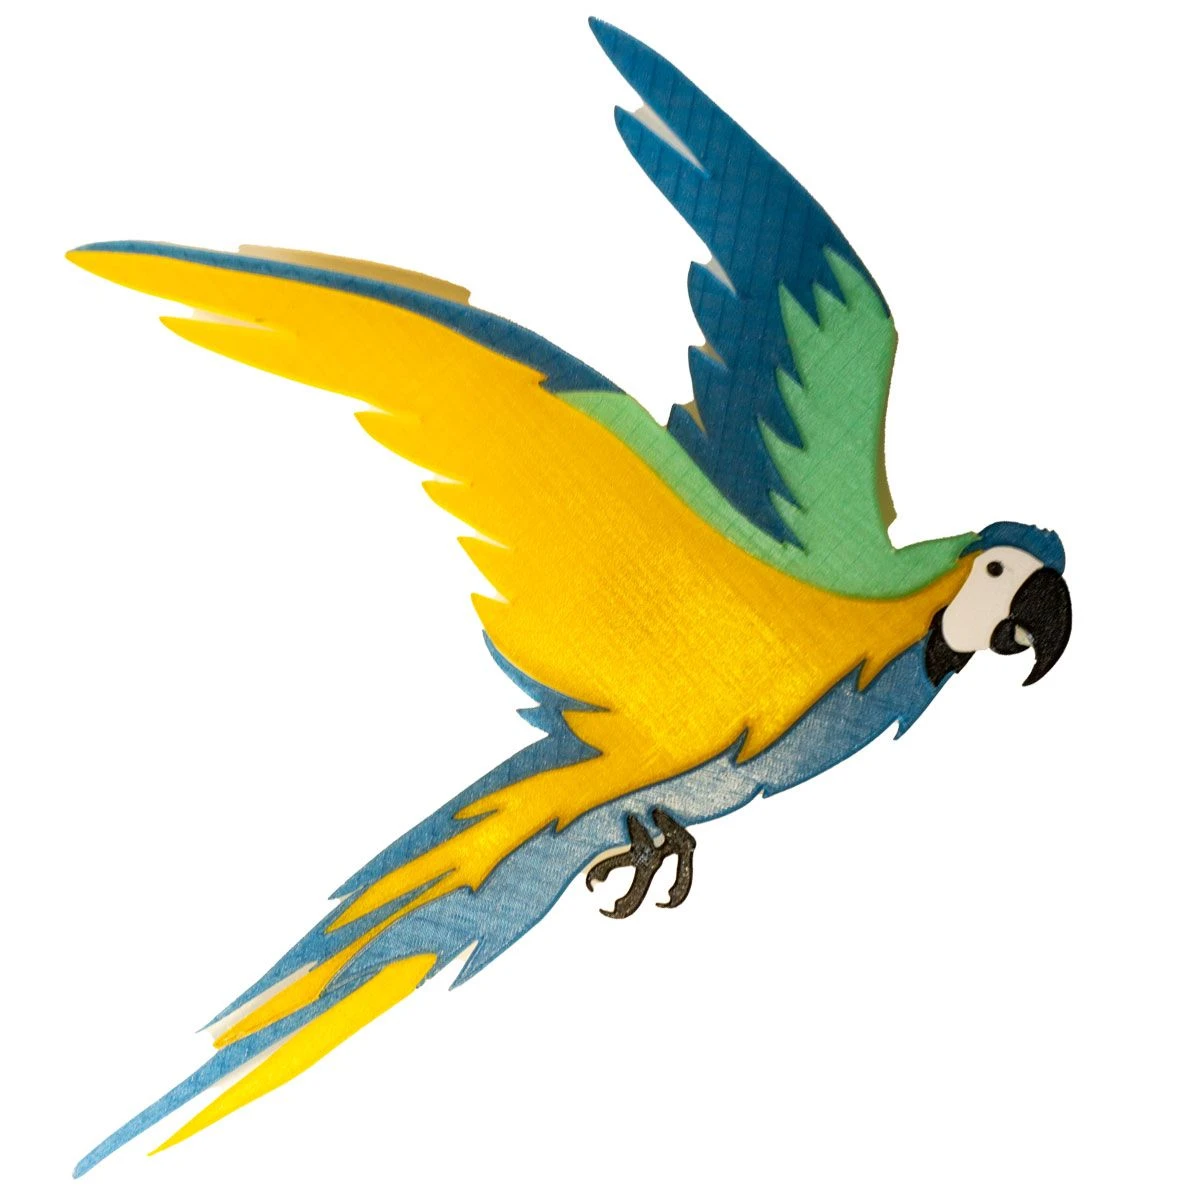 Sustainable window pictures: Handmade macaw in yellow with suction cup